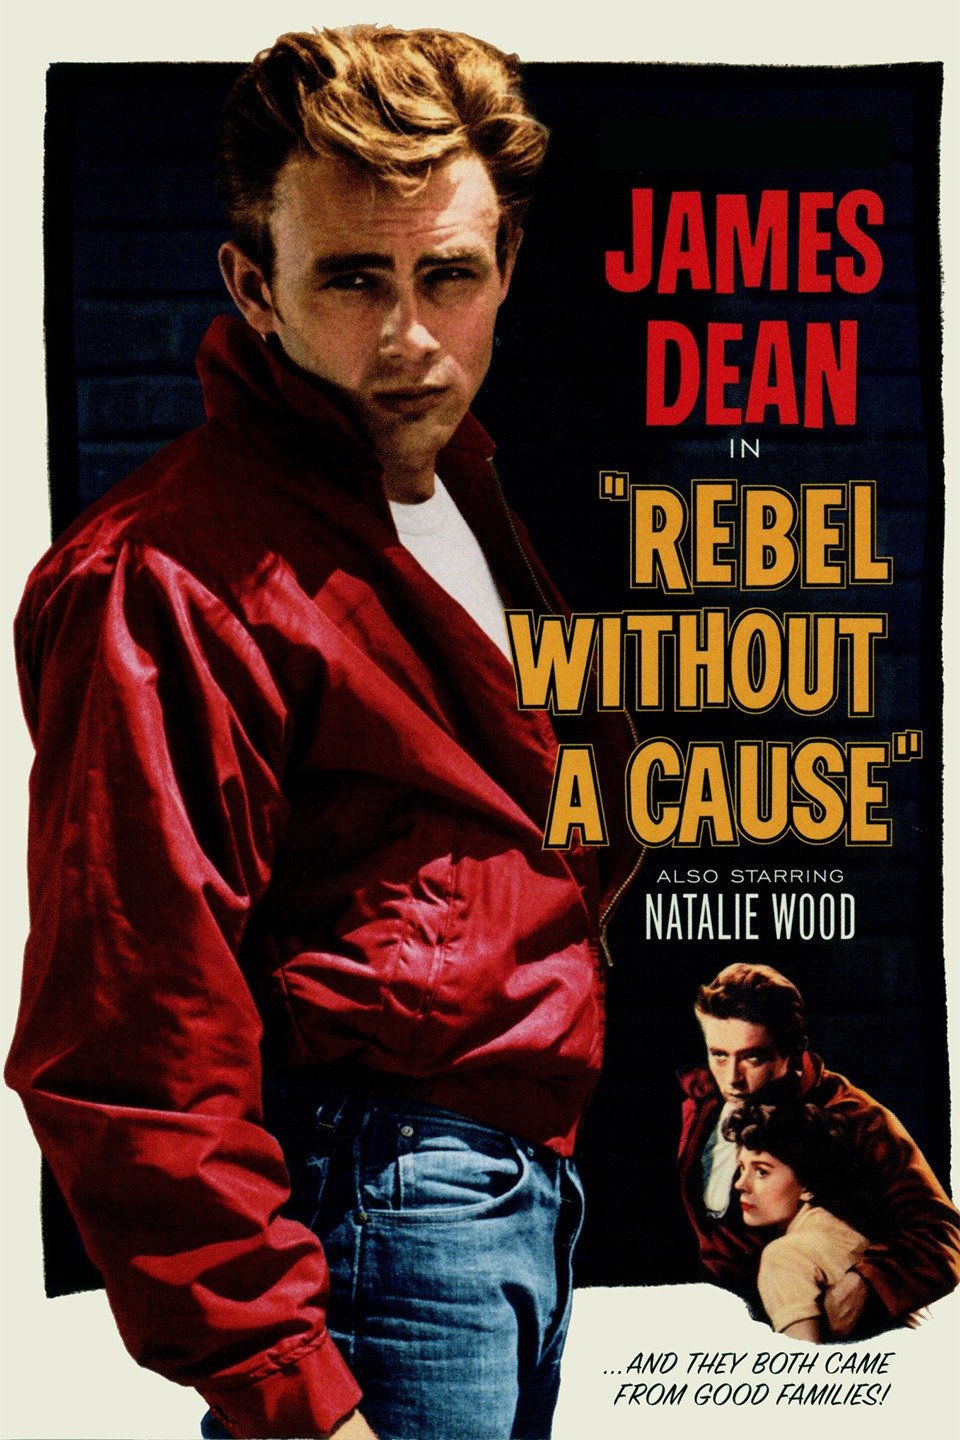 James Dean Rebel Without A Cause – The Mommies Reviews